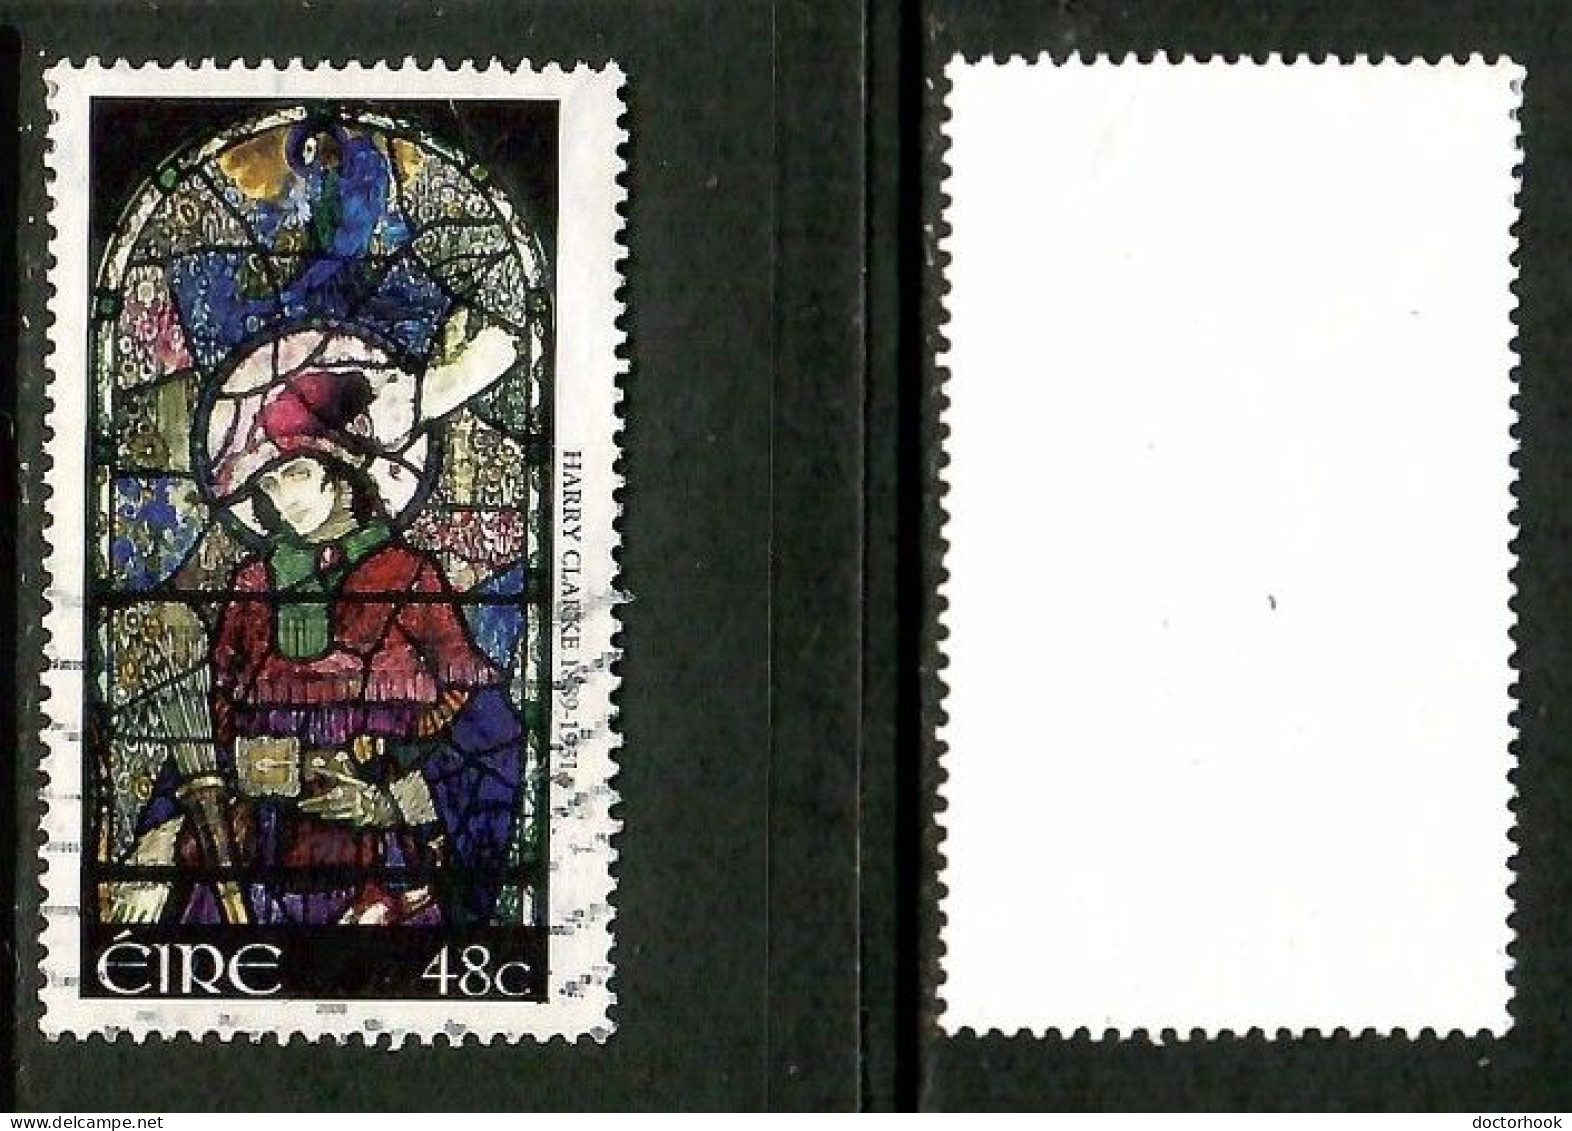 IRELAND   Scott # 1660 USED (CONDITION AS PER SCAN) (Stamp Scan # 990-10) - Used Stamps